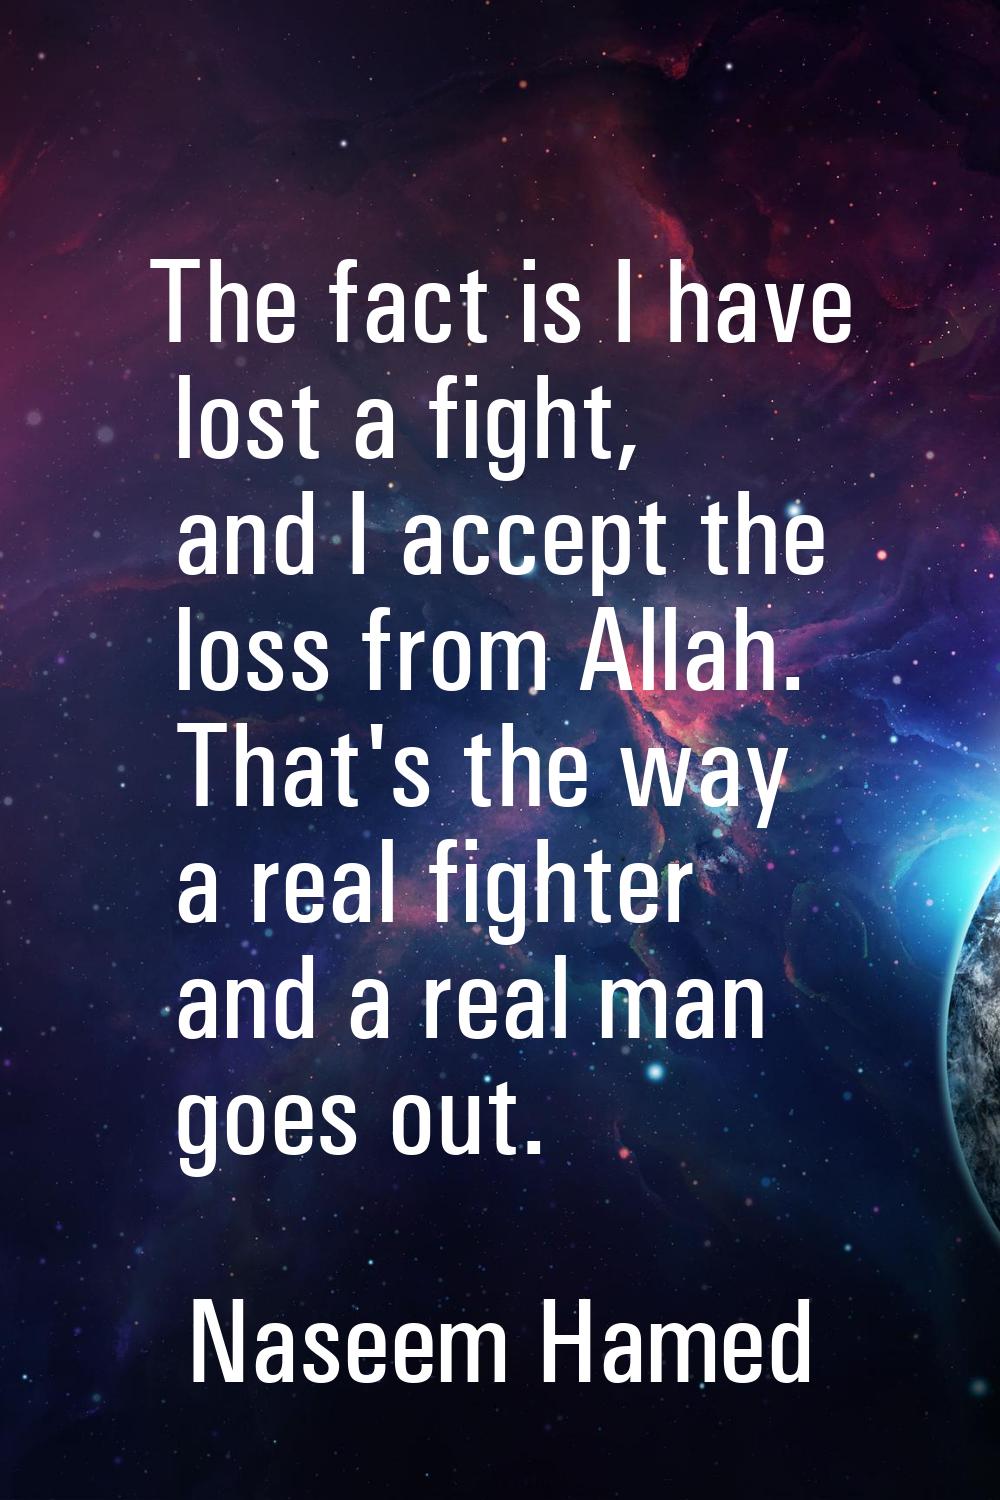 The fact is I have lost a fight, and I accept the loss from Allah. That's the way a real fighter an